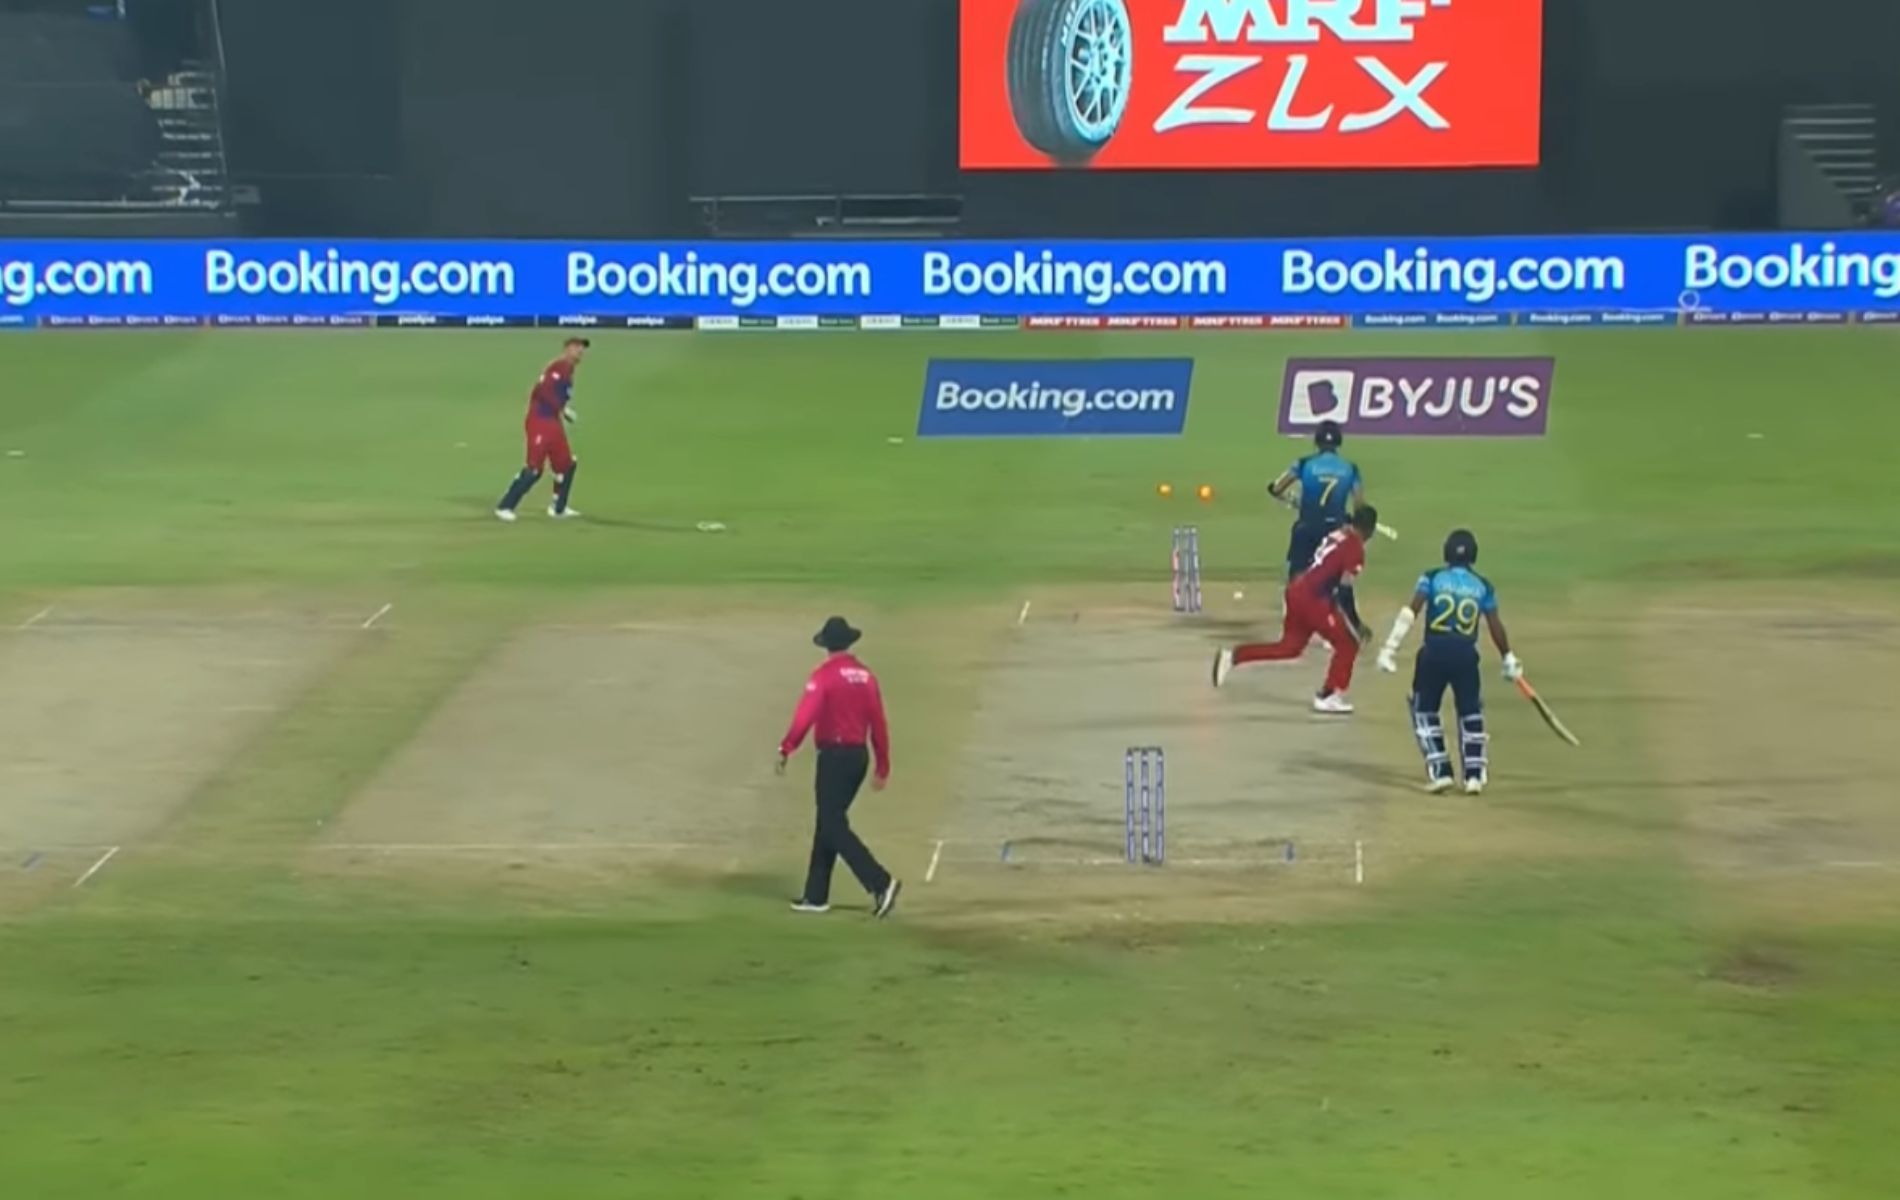 Jos Buttler showed great agility and accuracy to run Dasun Shanaka out with a direct hit.